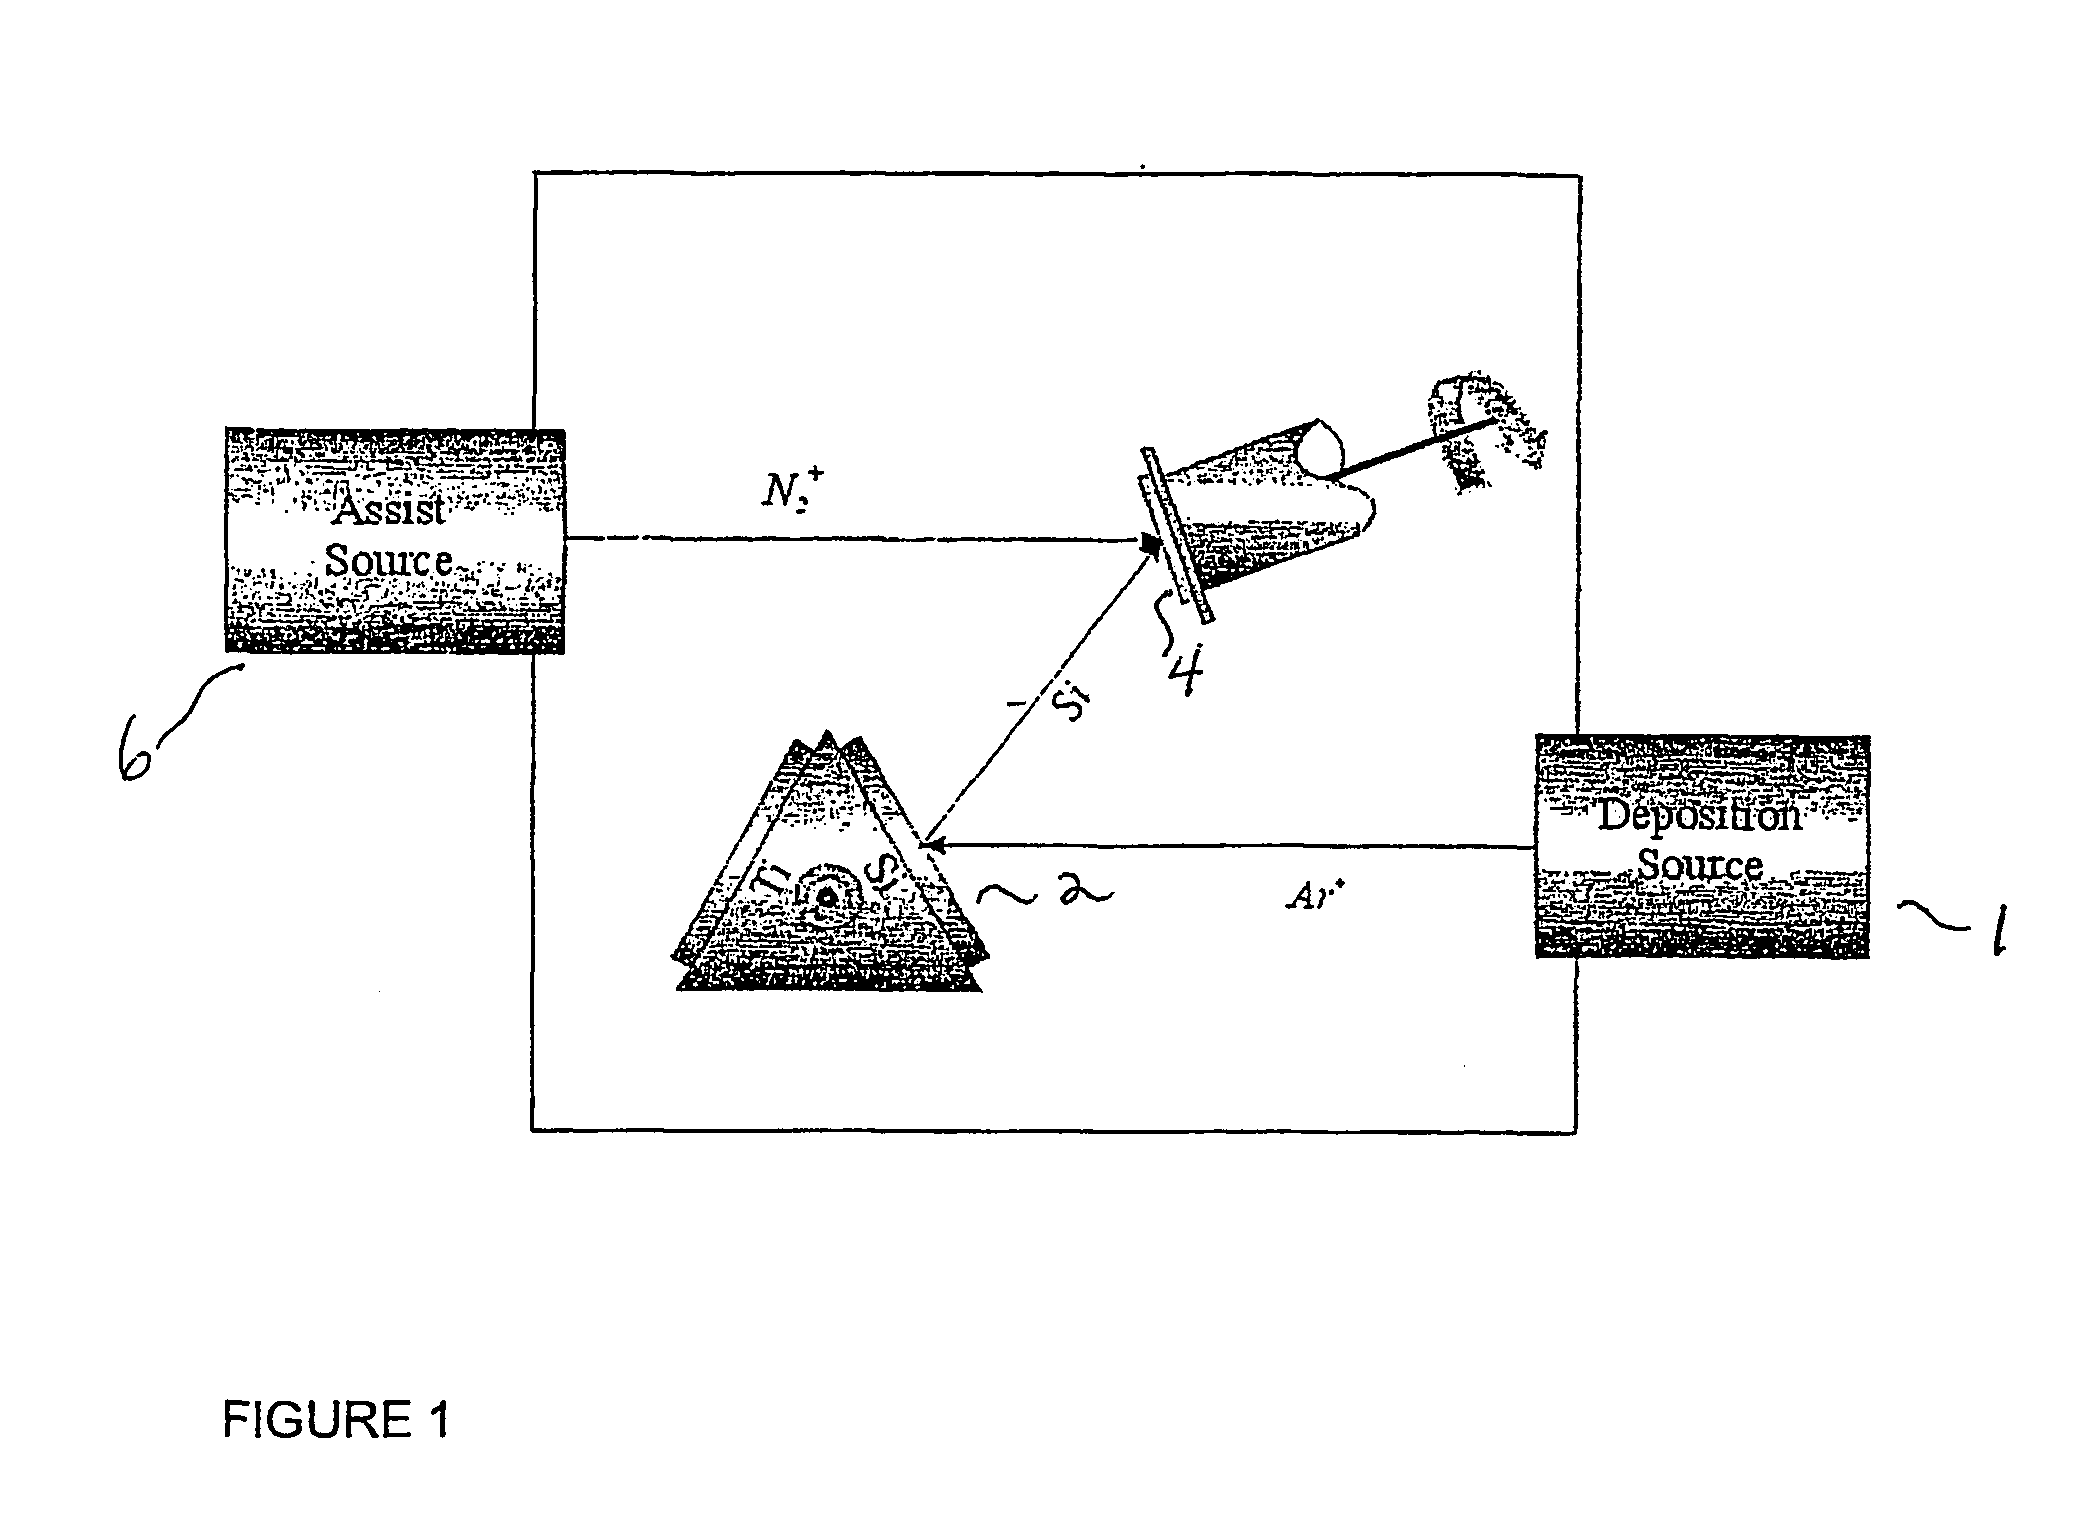 Ion-beam deposition process for manufacturing multi-layered attenuated phase shift photomask blanks